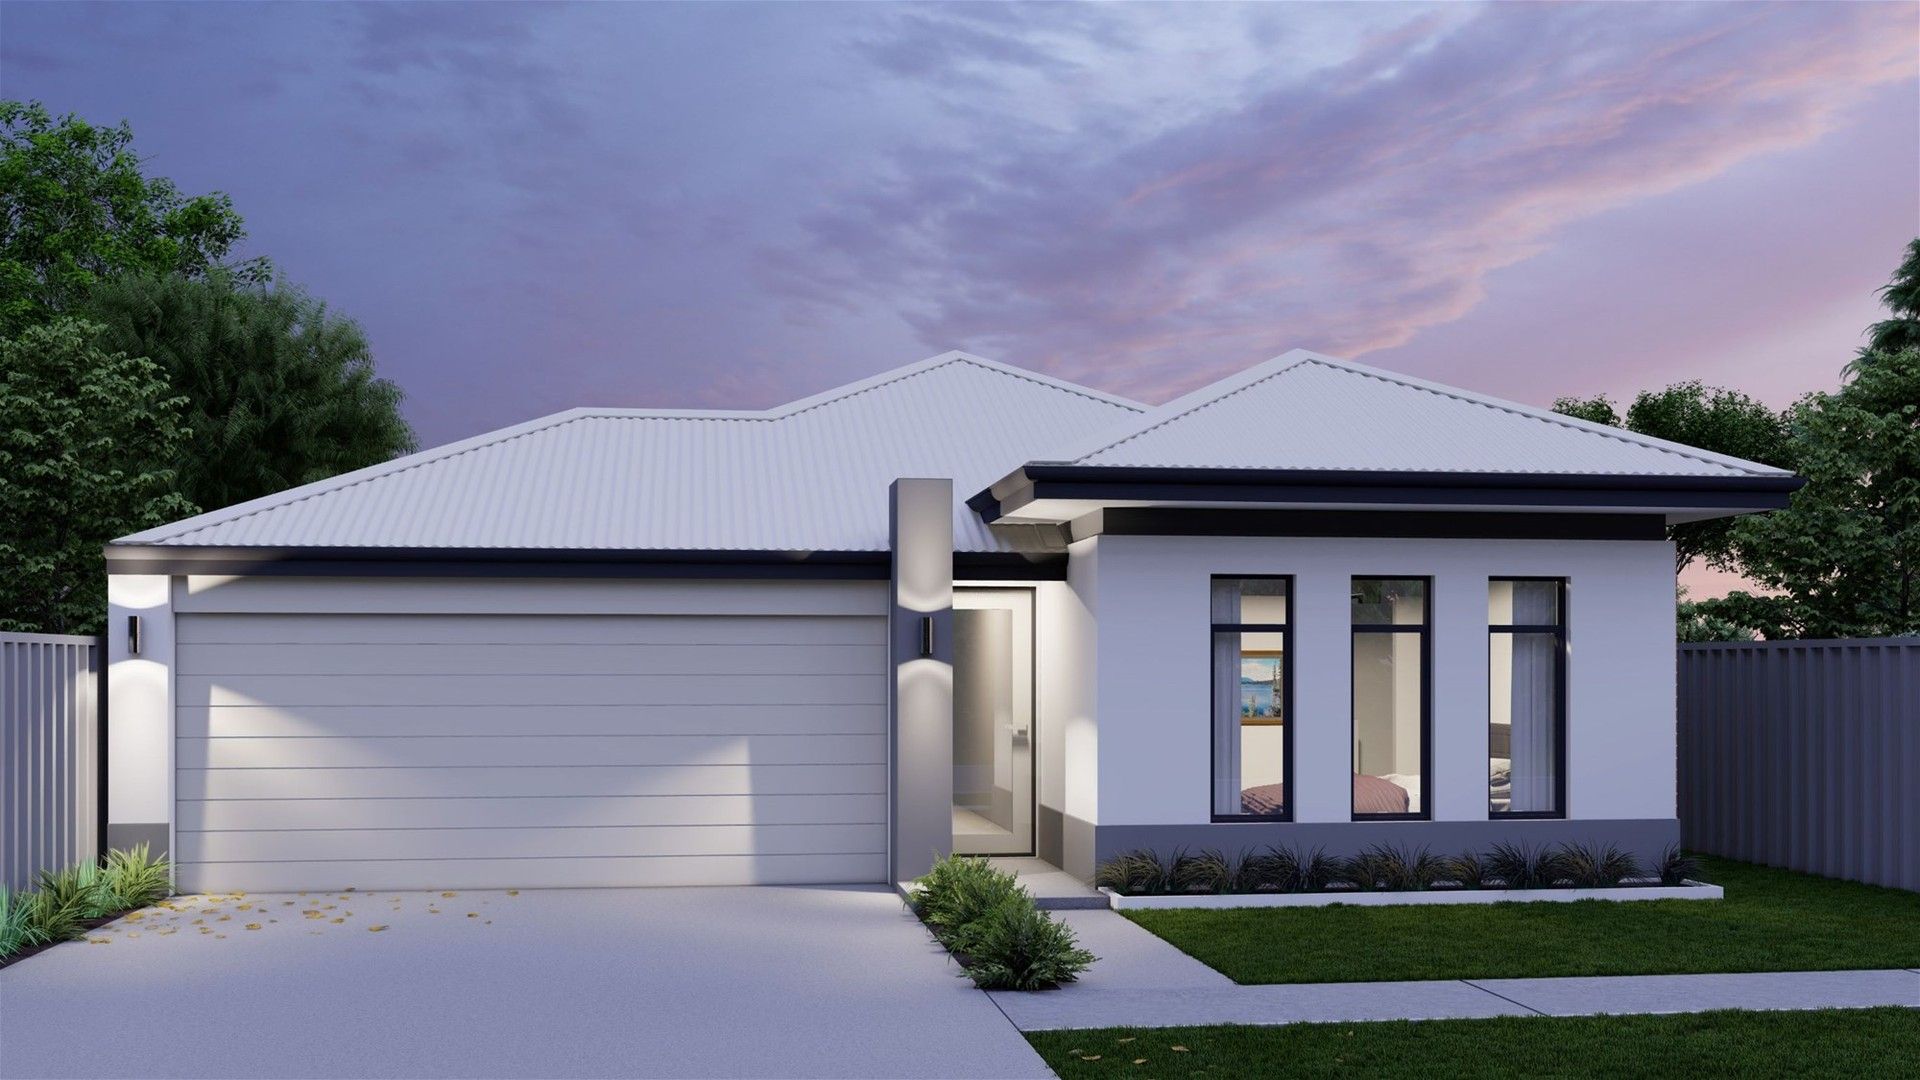 4 bedrooms New House & Land in LOT 938 ENCHANTED CIRCUIT BALDIVIS WA, 6171